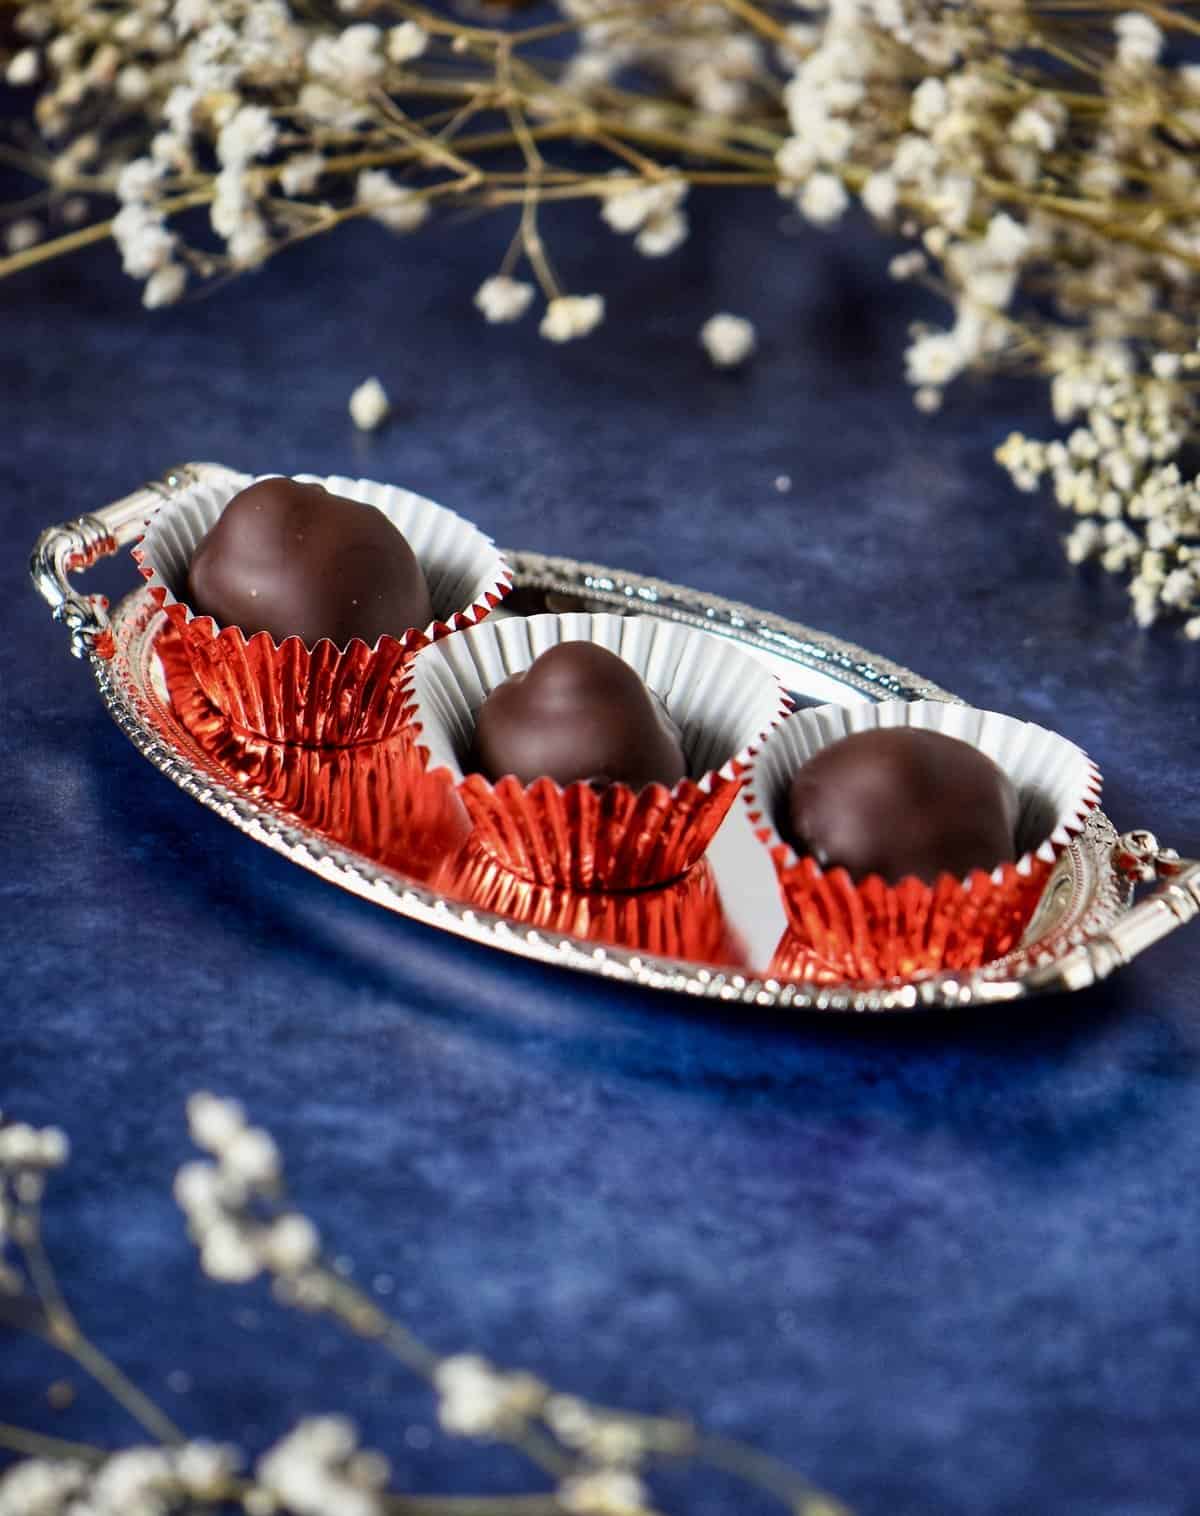 Three homemade Italian kisses in red confection liners on a silver tray.